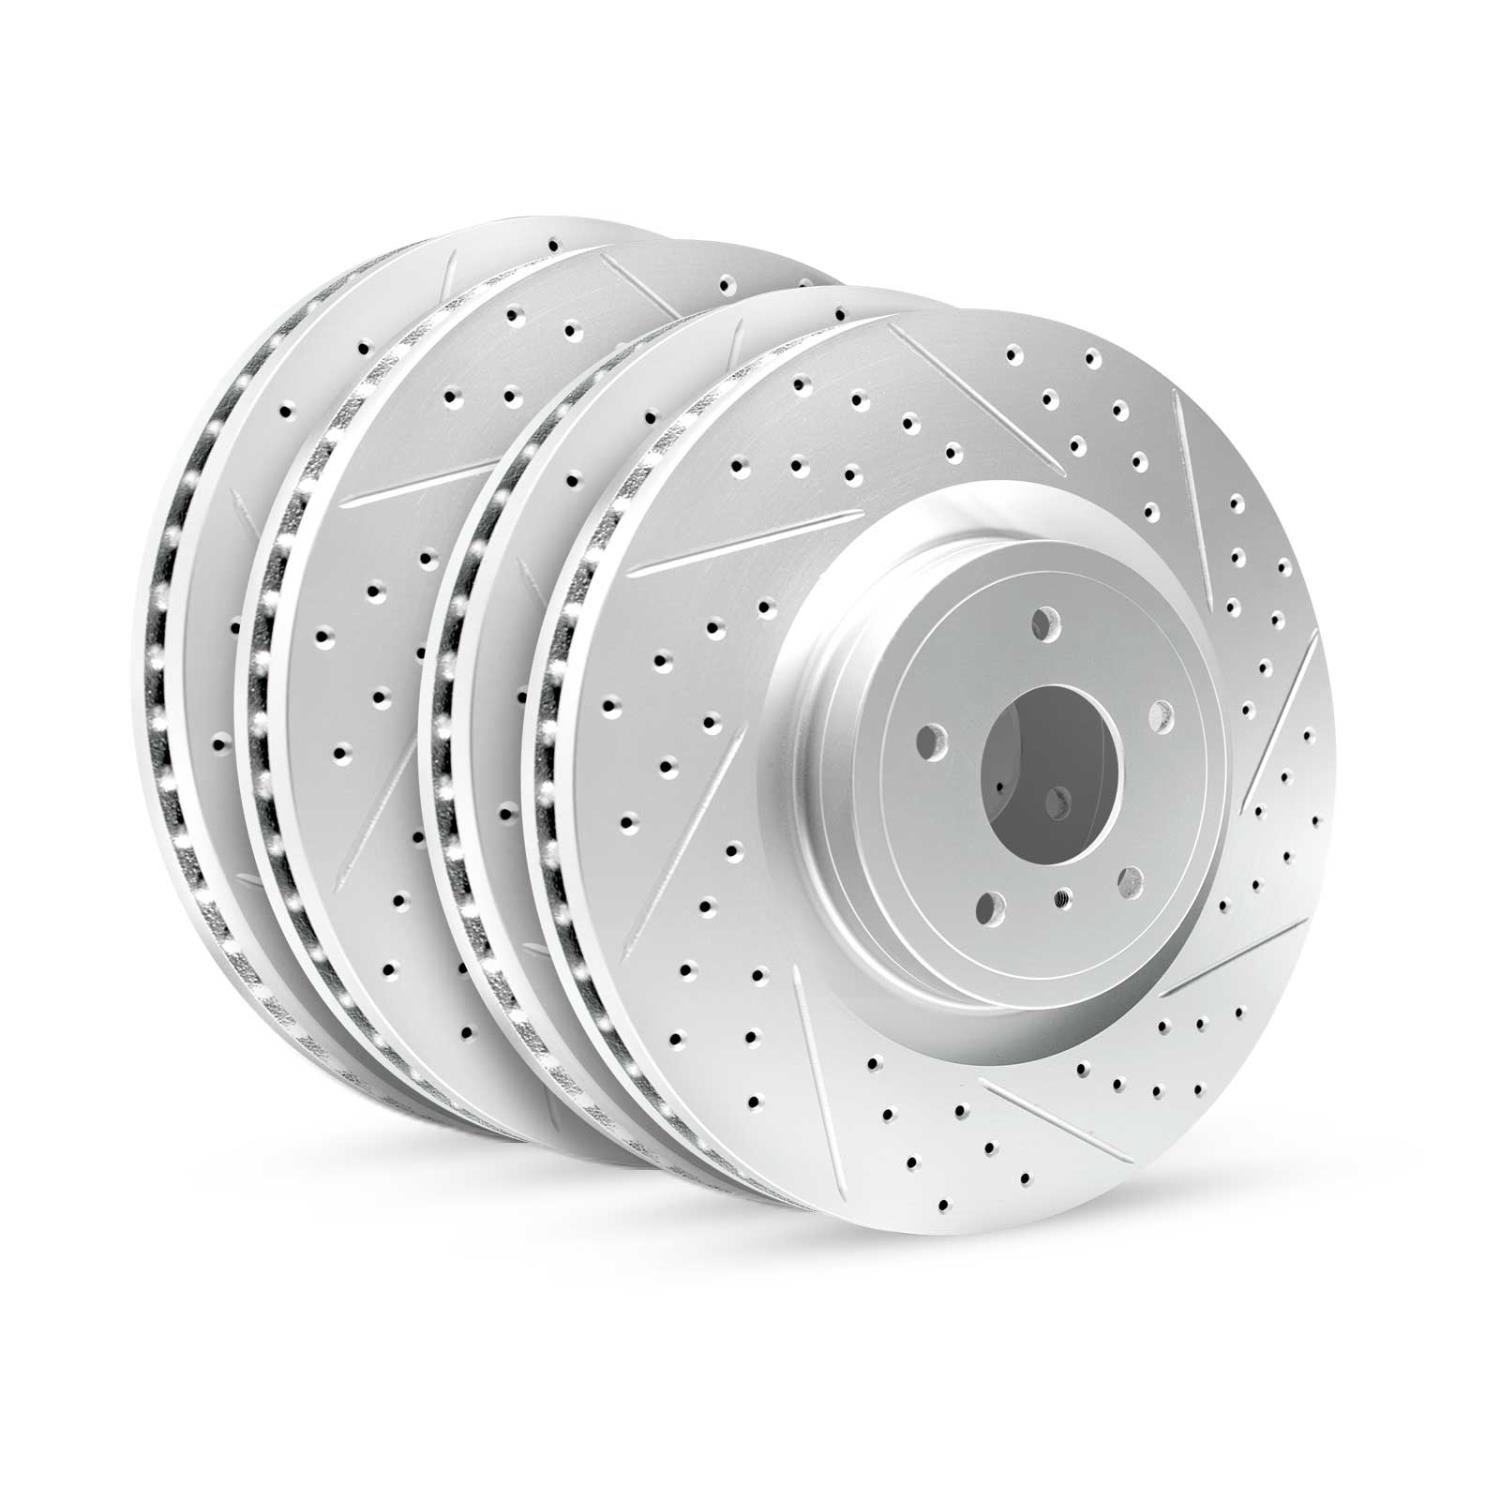 GEO-Carbon Drilled/Slotted Rotors, 2010-2011 Kia/Hyundai/Genesis, Position: Front/Rear